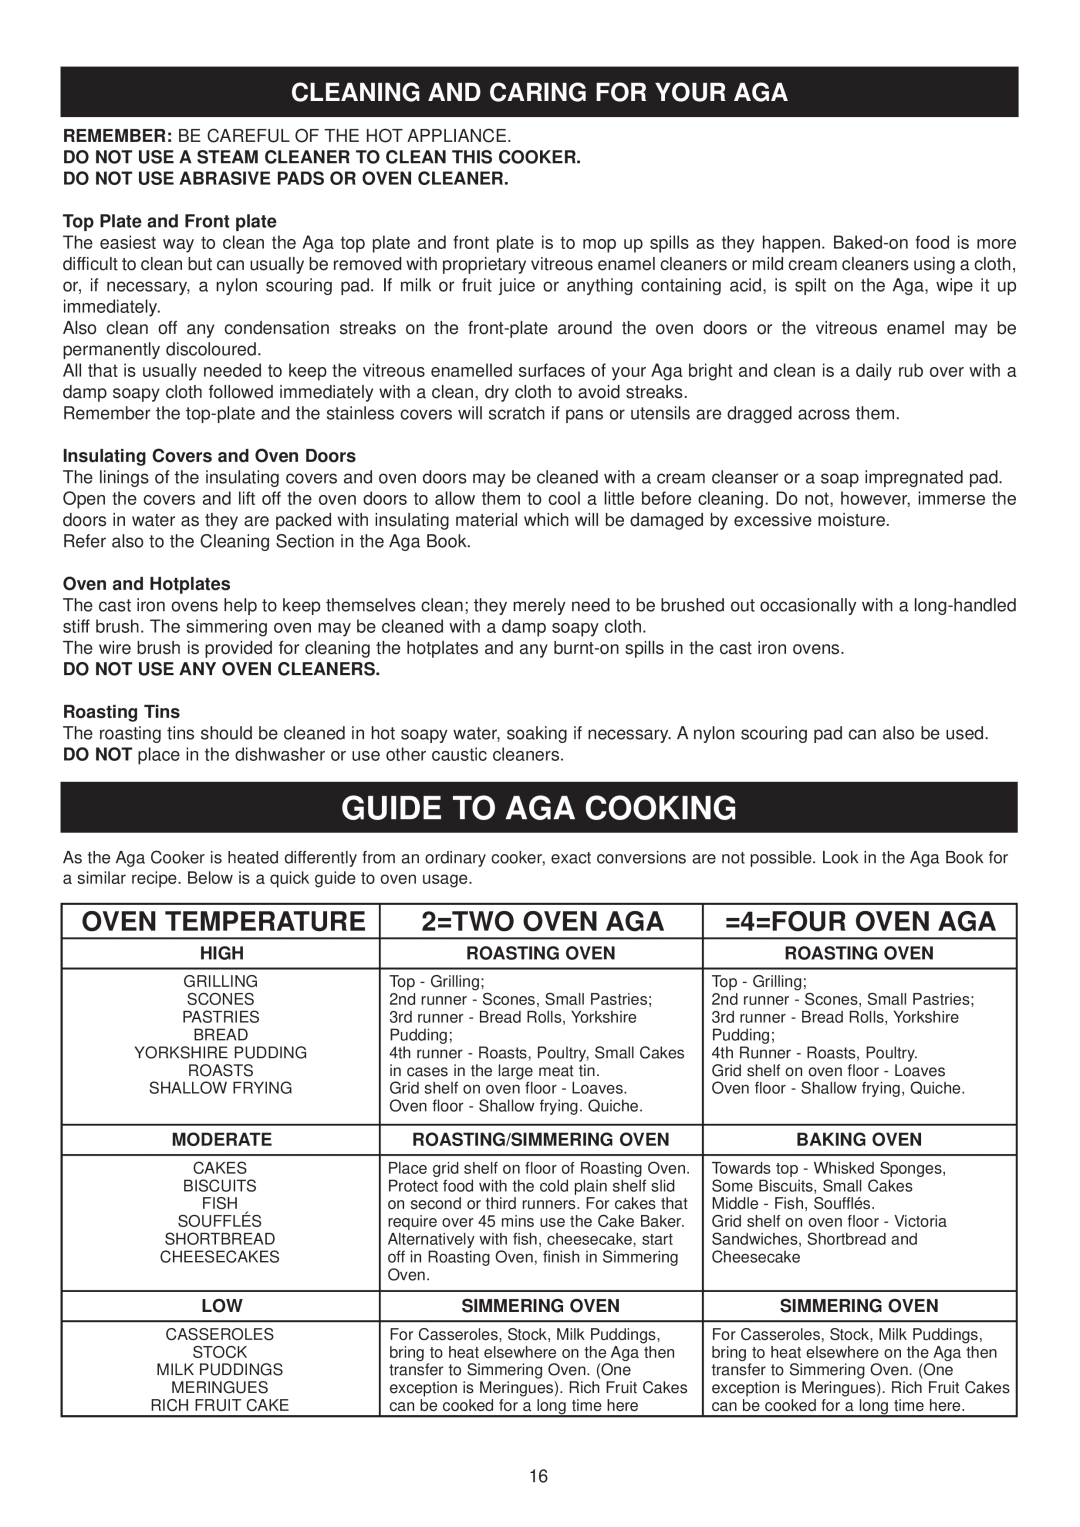 Aga Ranges EE LM-4, EC LM-2 Cleaning And Caring For Your Aga, Guide To Aga Cooking, Oven Temperature, 2=TWO OVEN AGA 